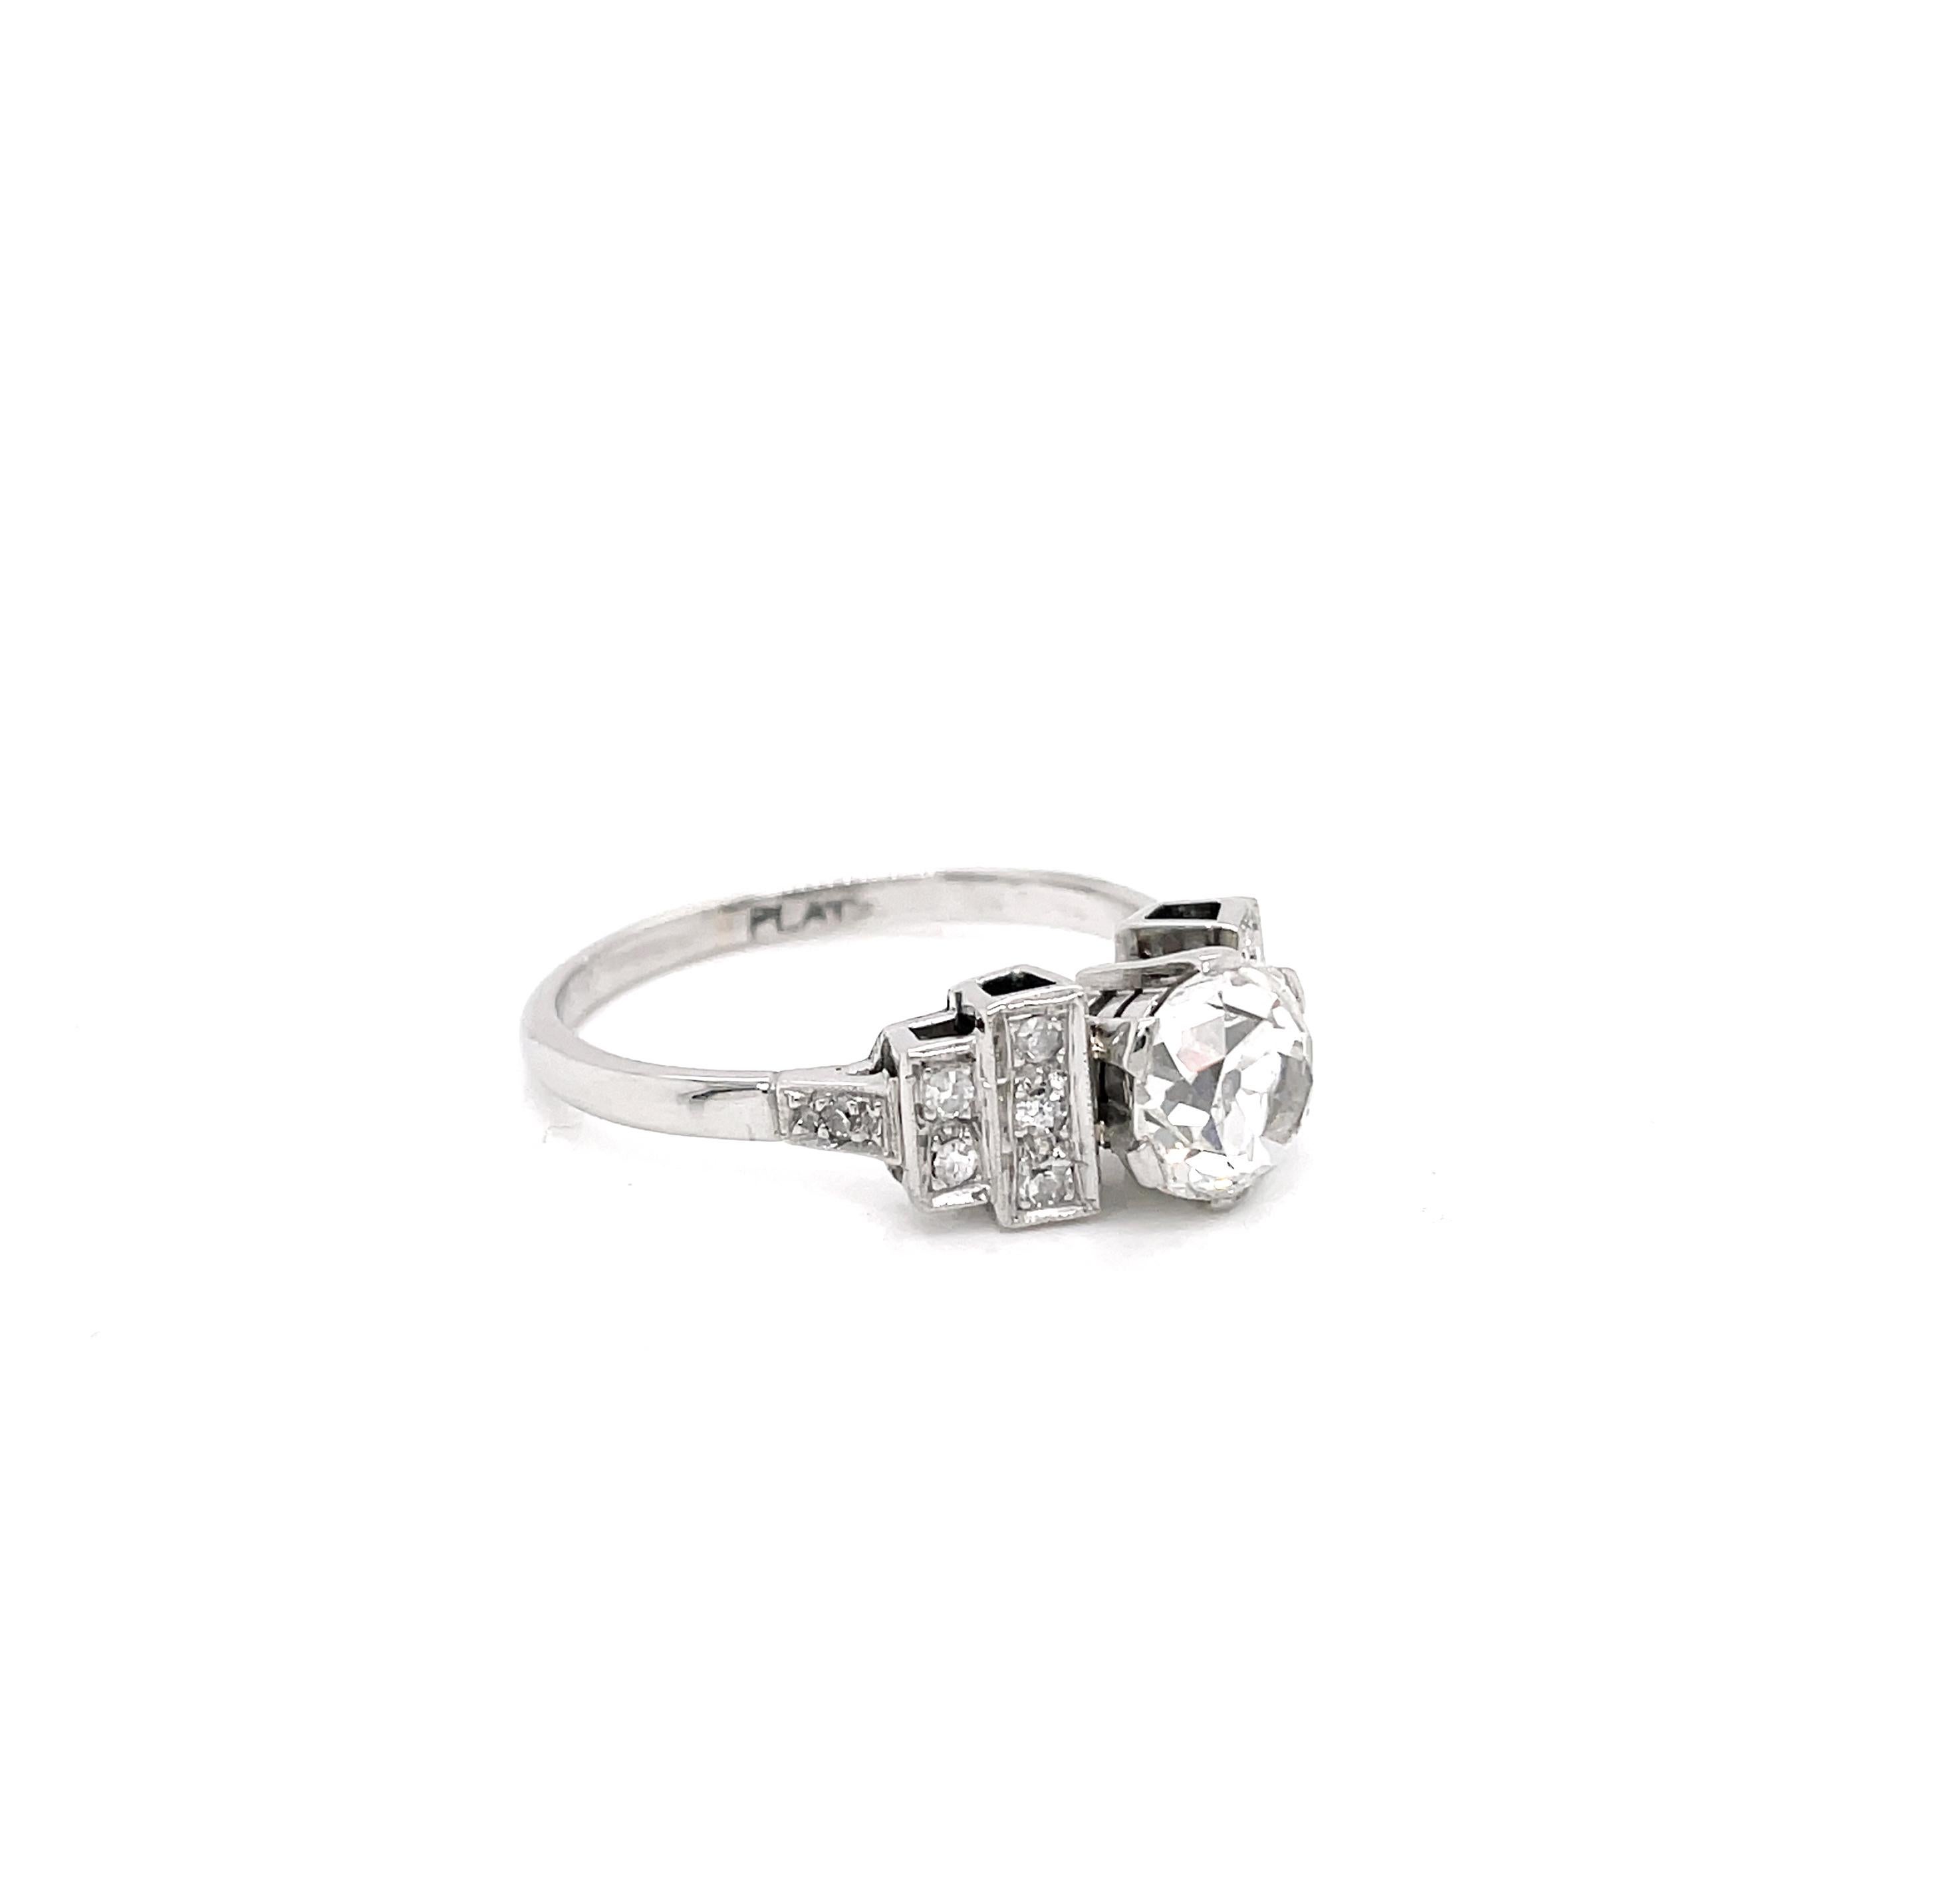 This incredible engagement ring is beautifully set with an old mine cut diamond weighing 1.75 carats mounted in a six claw open back setting. The centre stone is wonderfully designed with step shoulders, typical of the Deco period. Each shoulder is